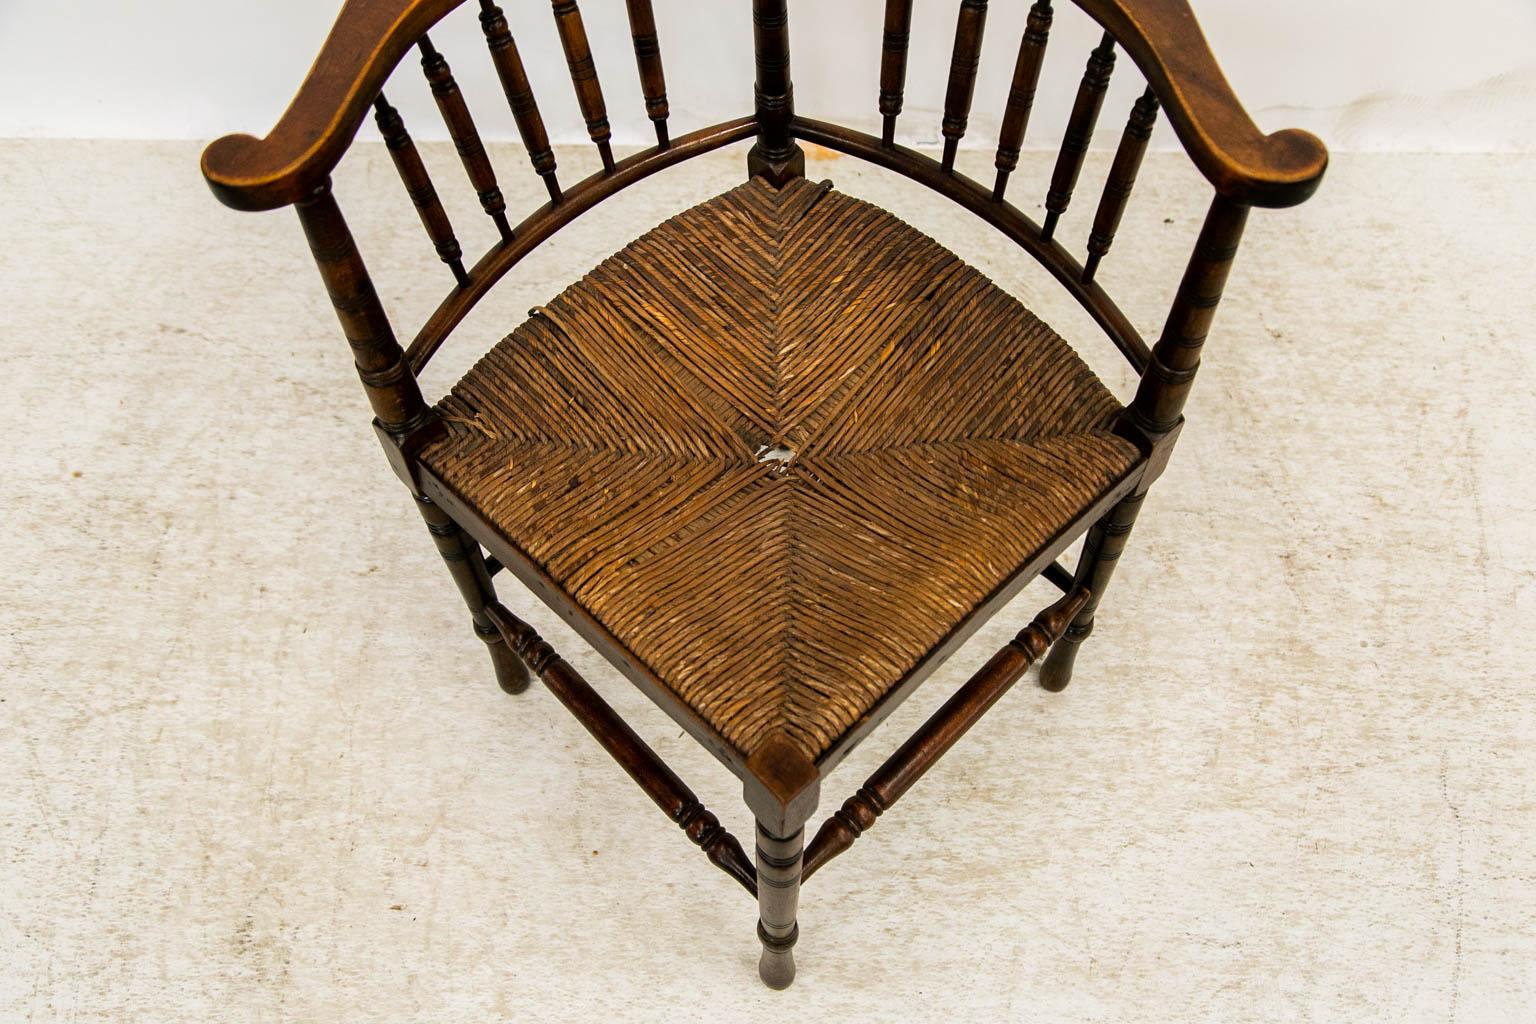 This fruitwood corner chair has a spindle back. The scrolled arms are supported by five turned spindles on each side. The legs are turned and supported by high-low stretchers. The rush seat is missing several strands of rush in the center but is